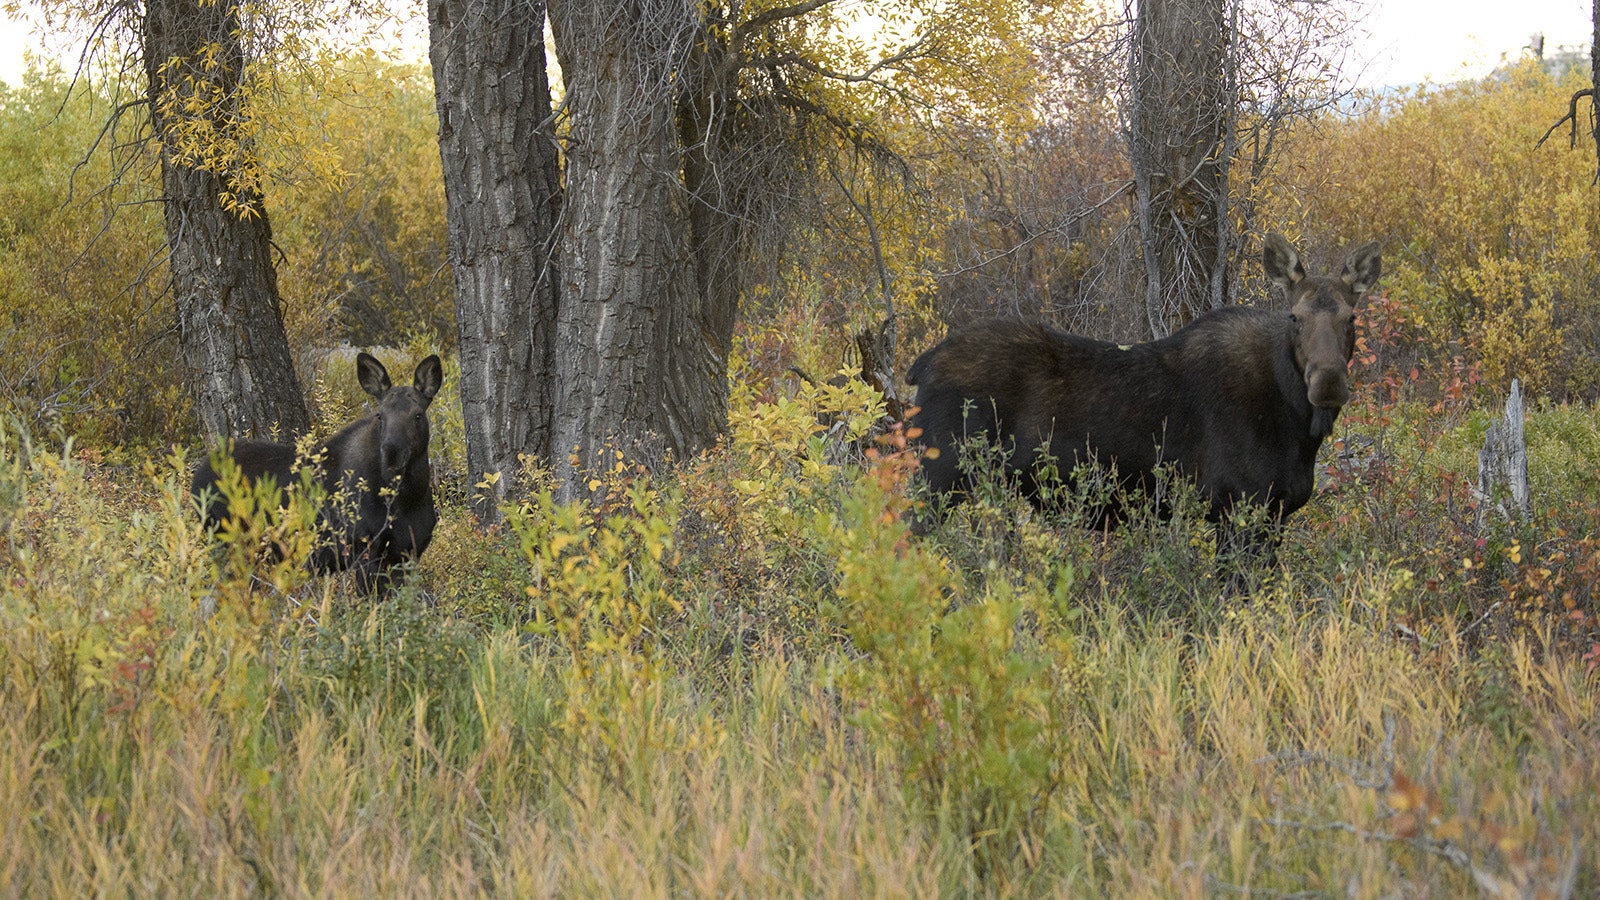 Wyoming’s moose are nothing to trifle with, especially female moose with calves to protect.